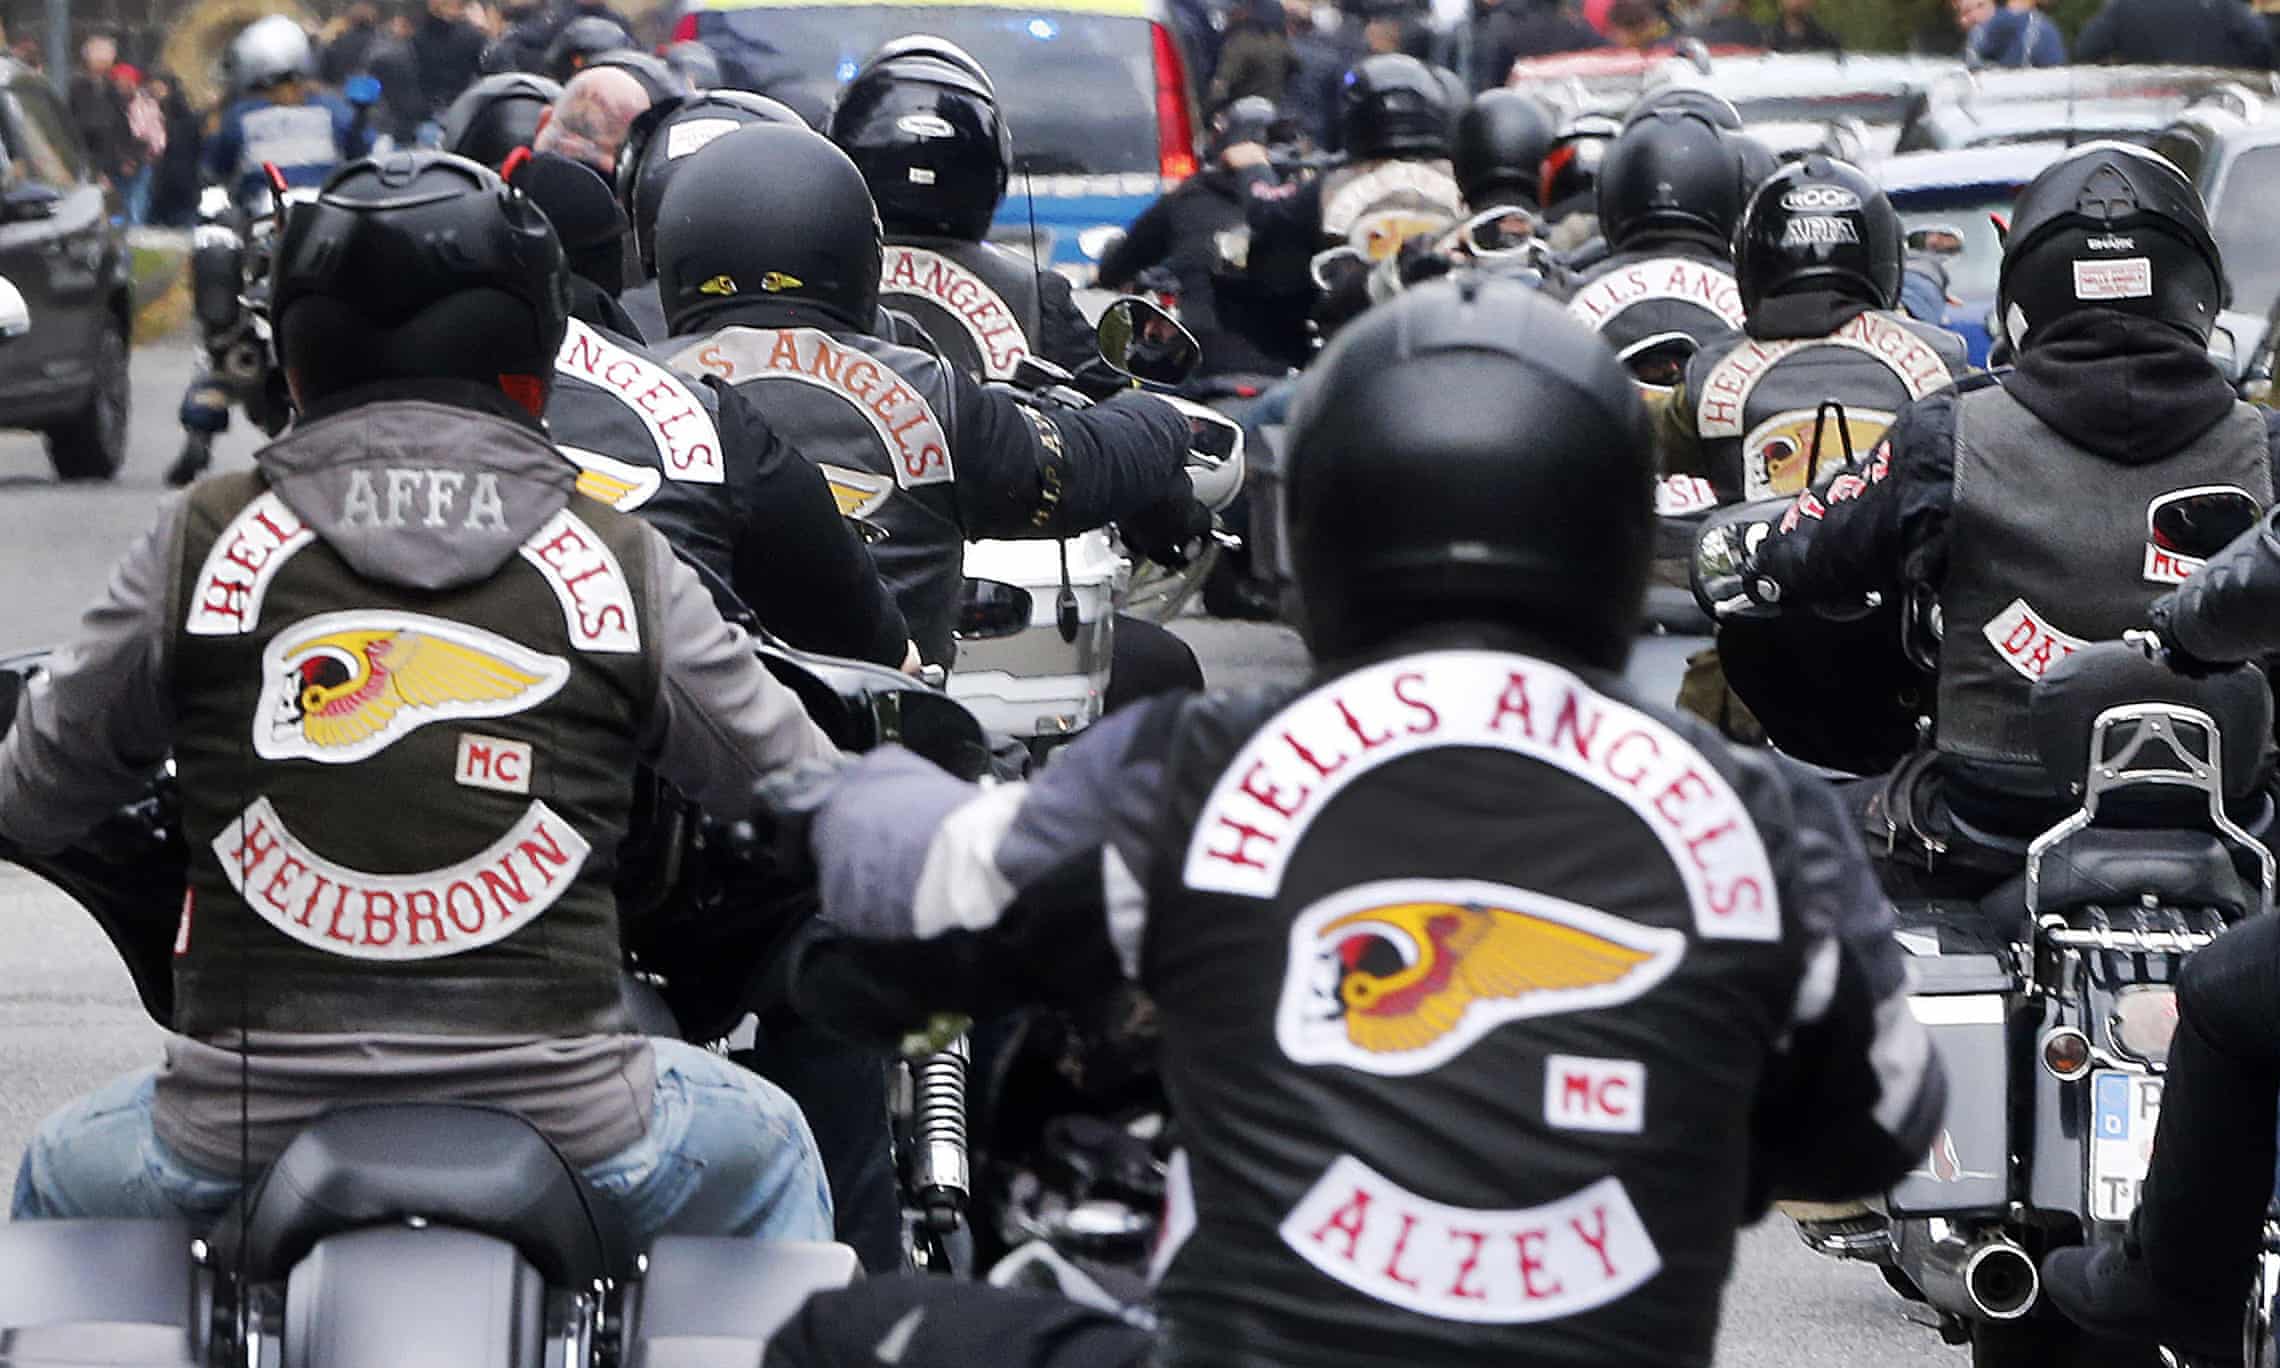 Hell's Angels arrested in California